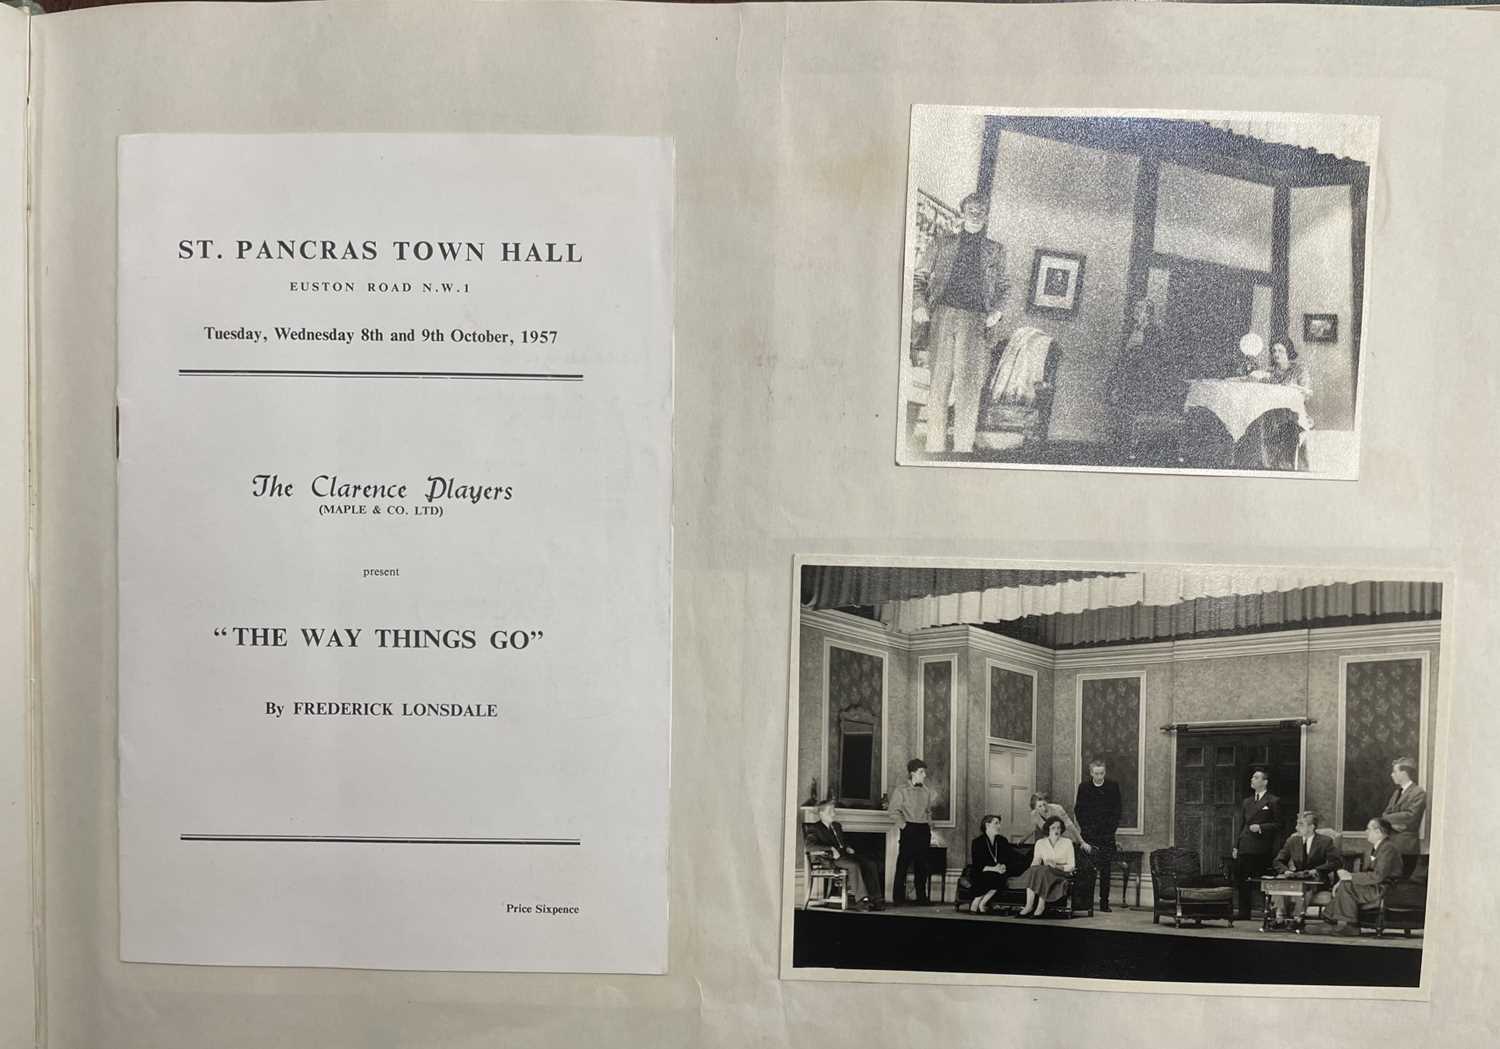 Autograph and Album with Theatrical Photos and Ephemera - Image 7 of 16